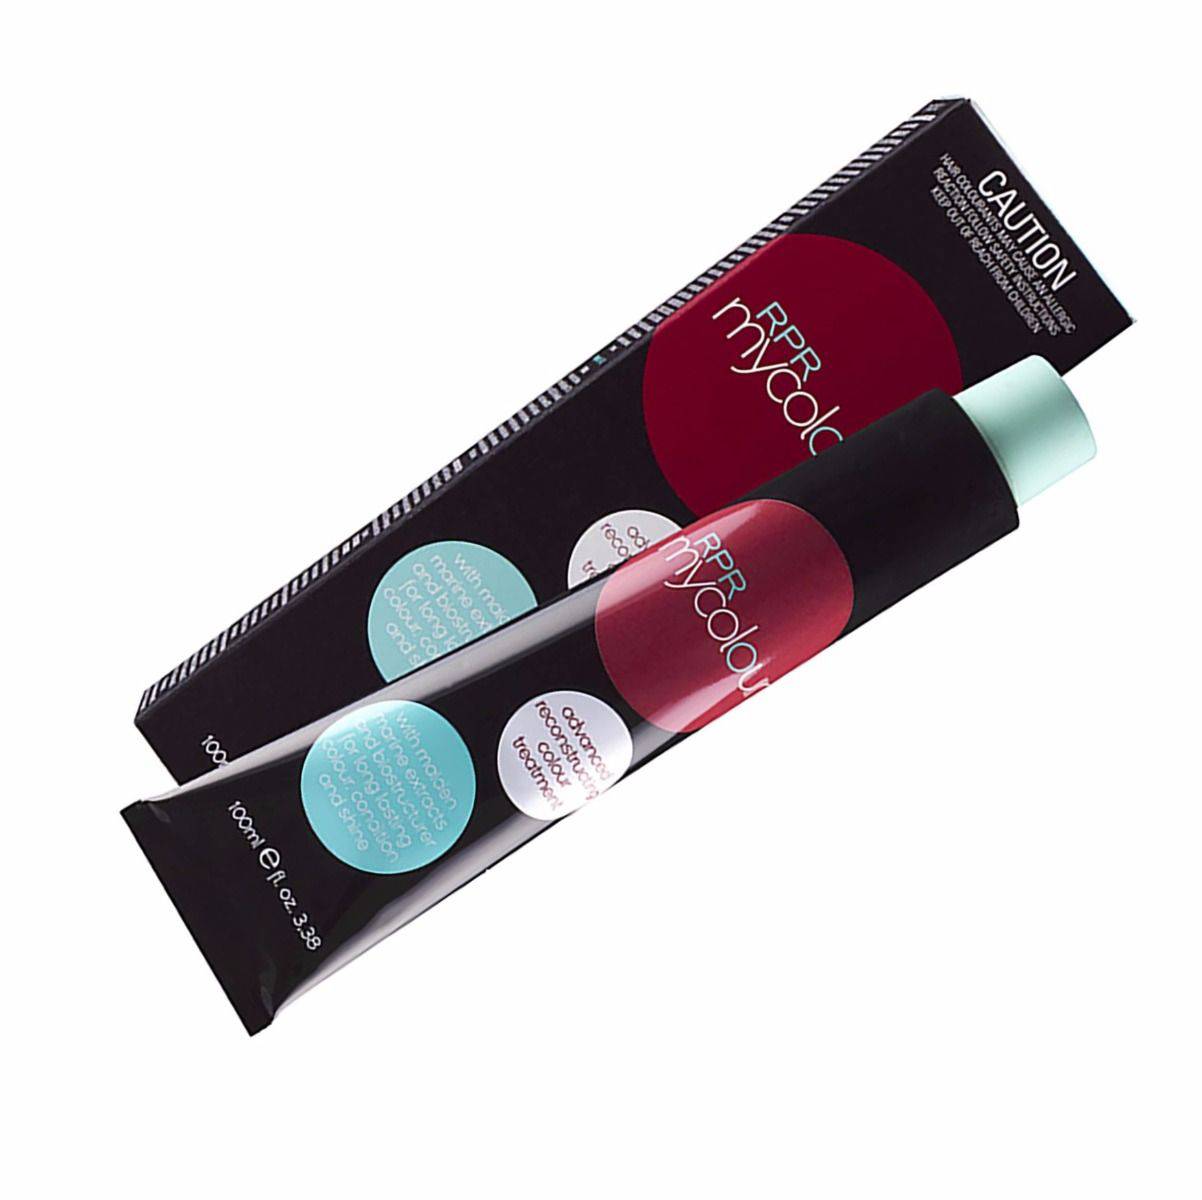 RPR My Colour V Violet Concentrate 100g tube Mix 1:1.5 - On Line Hair Depot